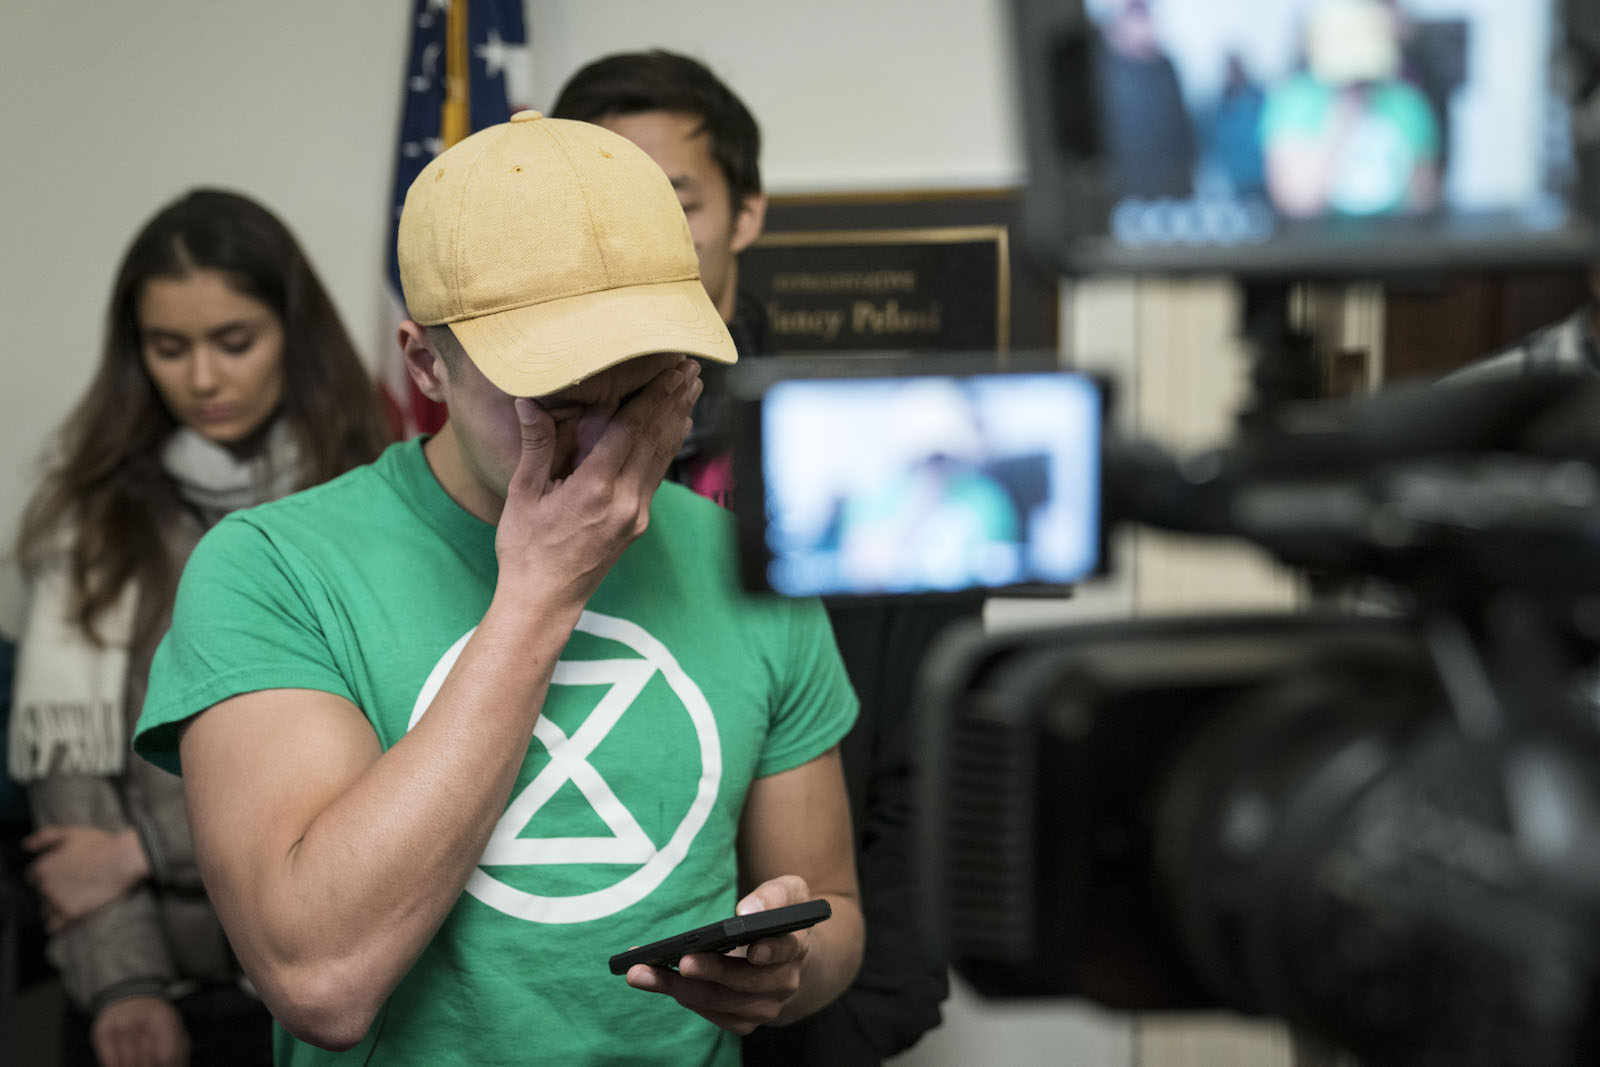 a man in a green shirt with an extinction rebellion logo on it holds a hand over his teary eyes while appearing to read off his phone